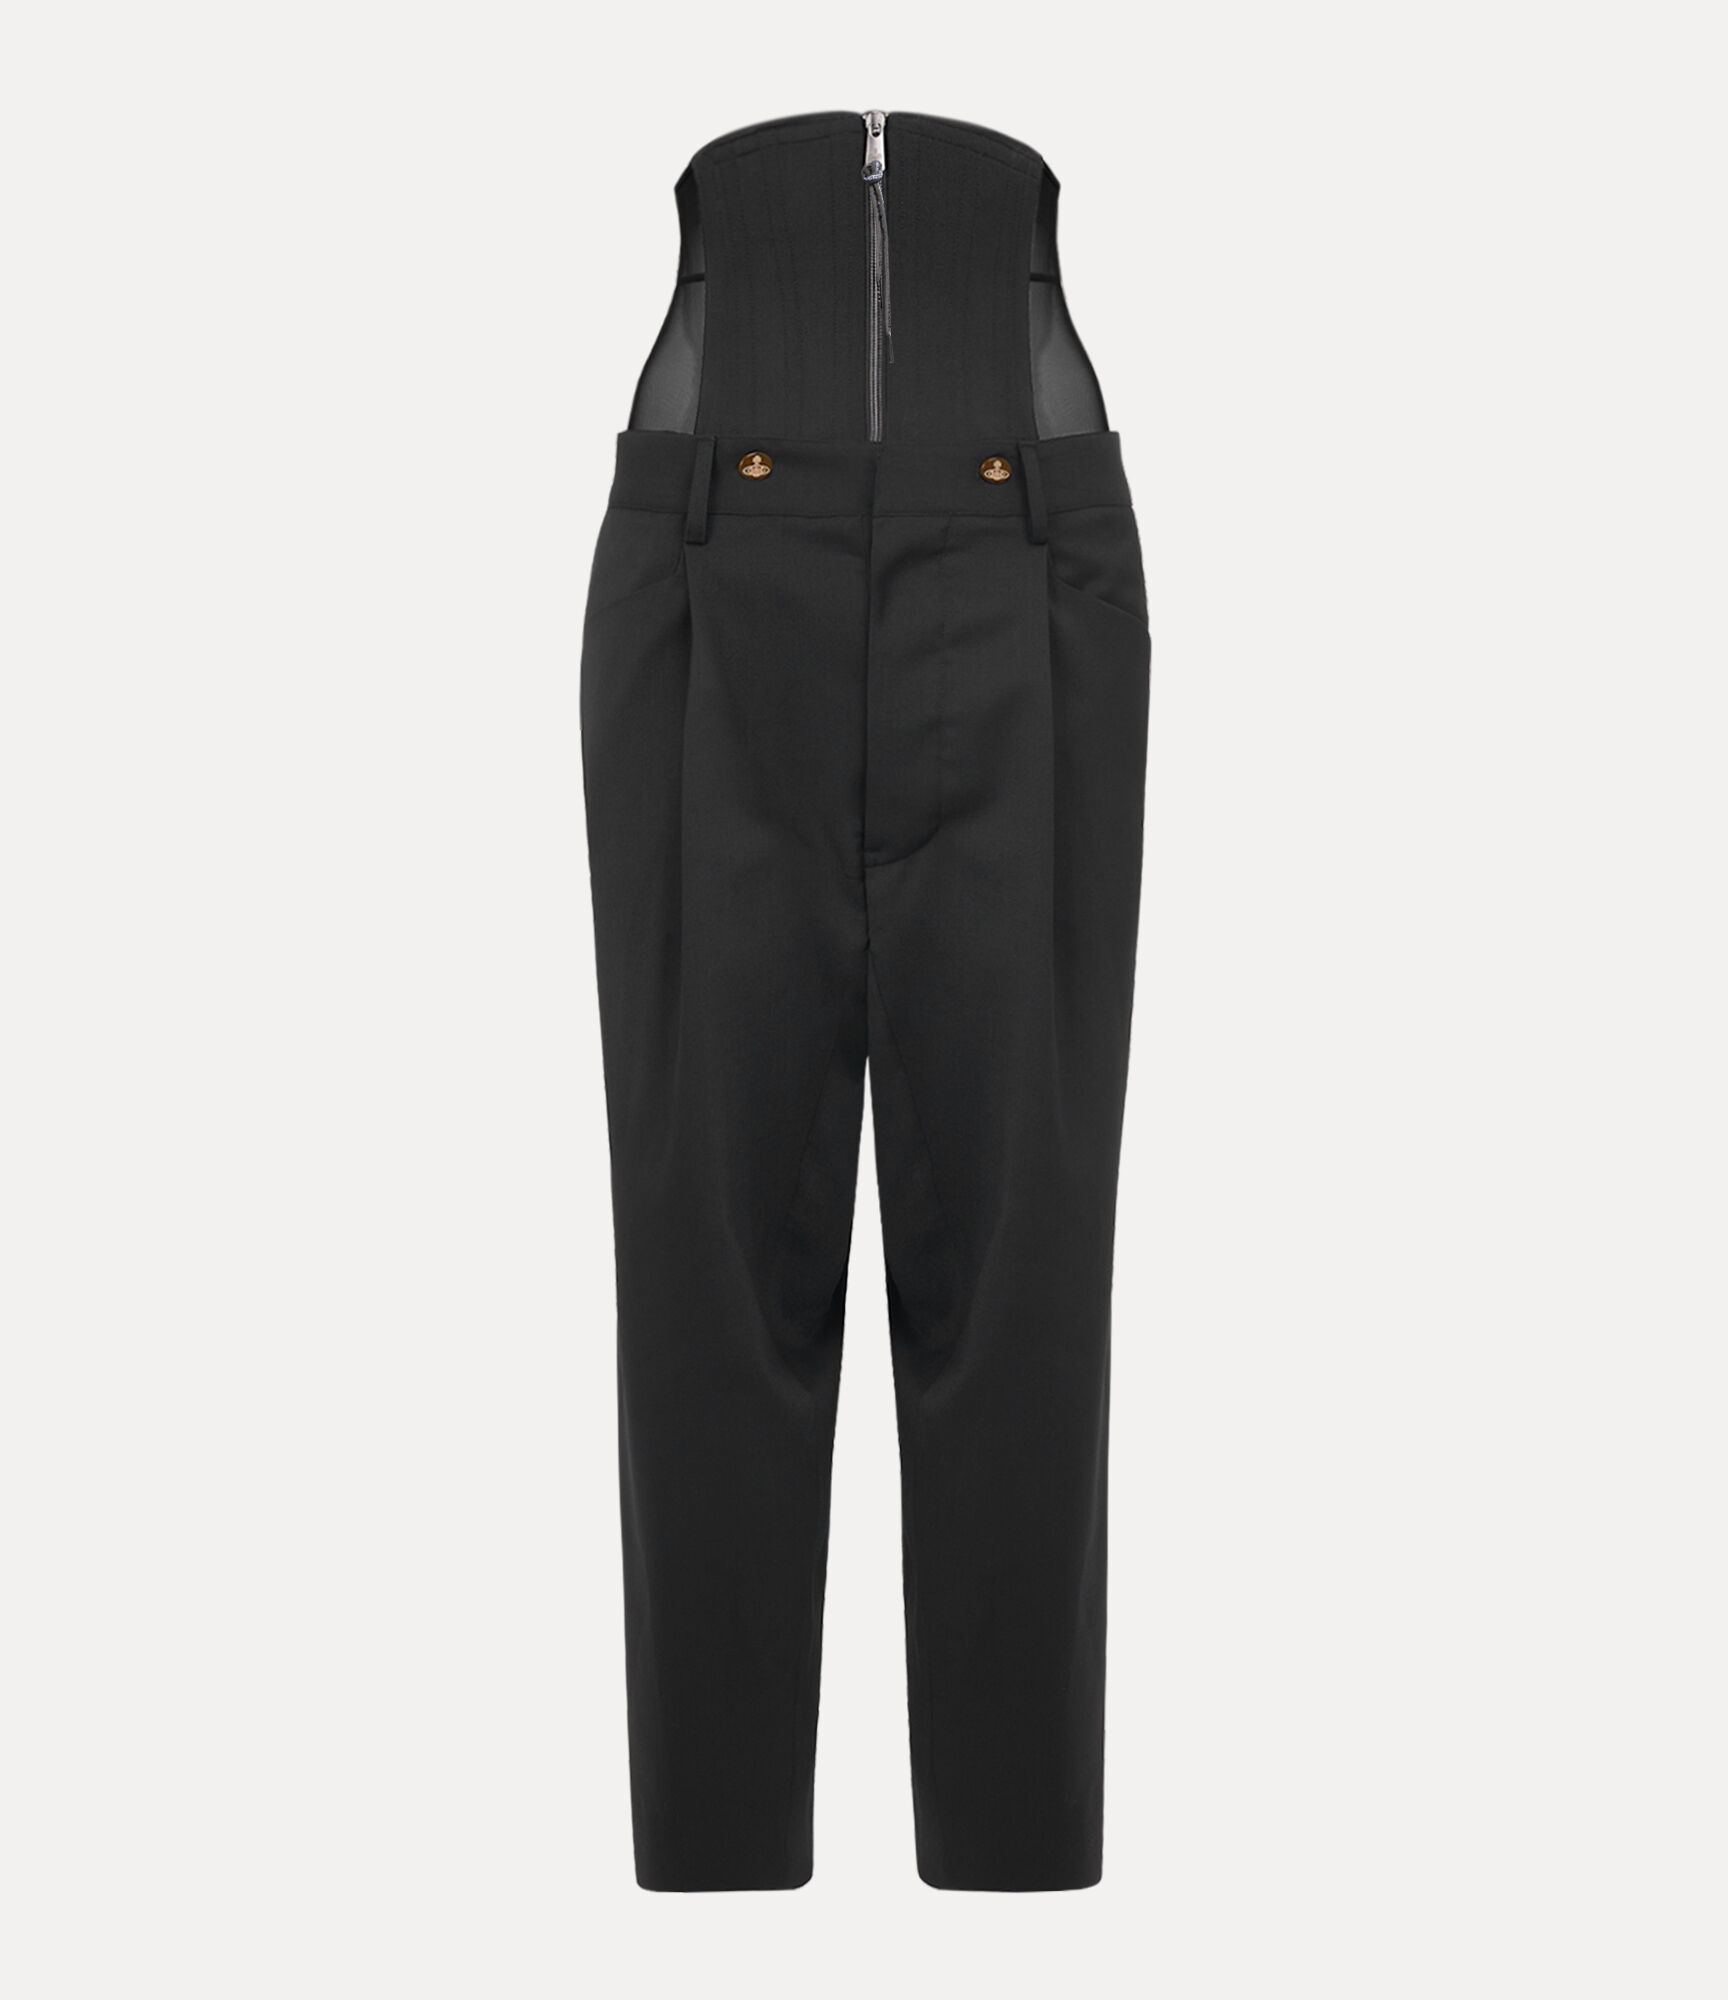 Vivienne Westwood houndstooth check trousers | Checked trousers, Vivienne  westwood, Houndstooth